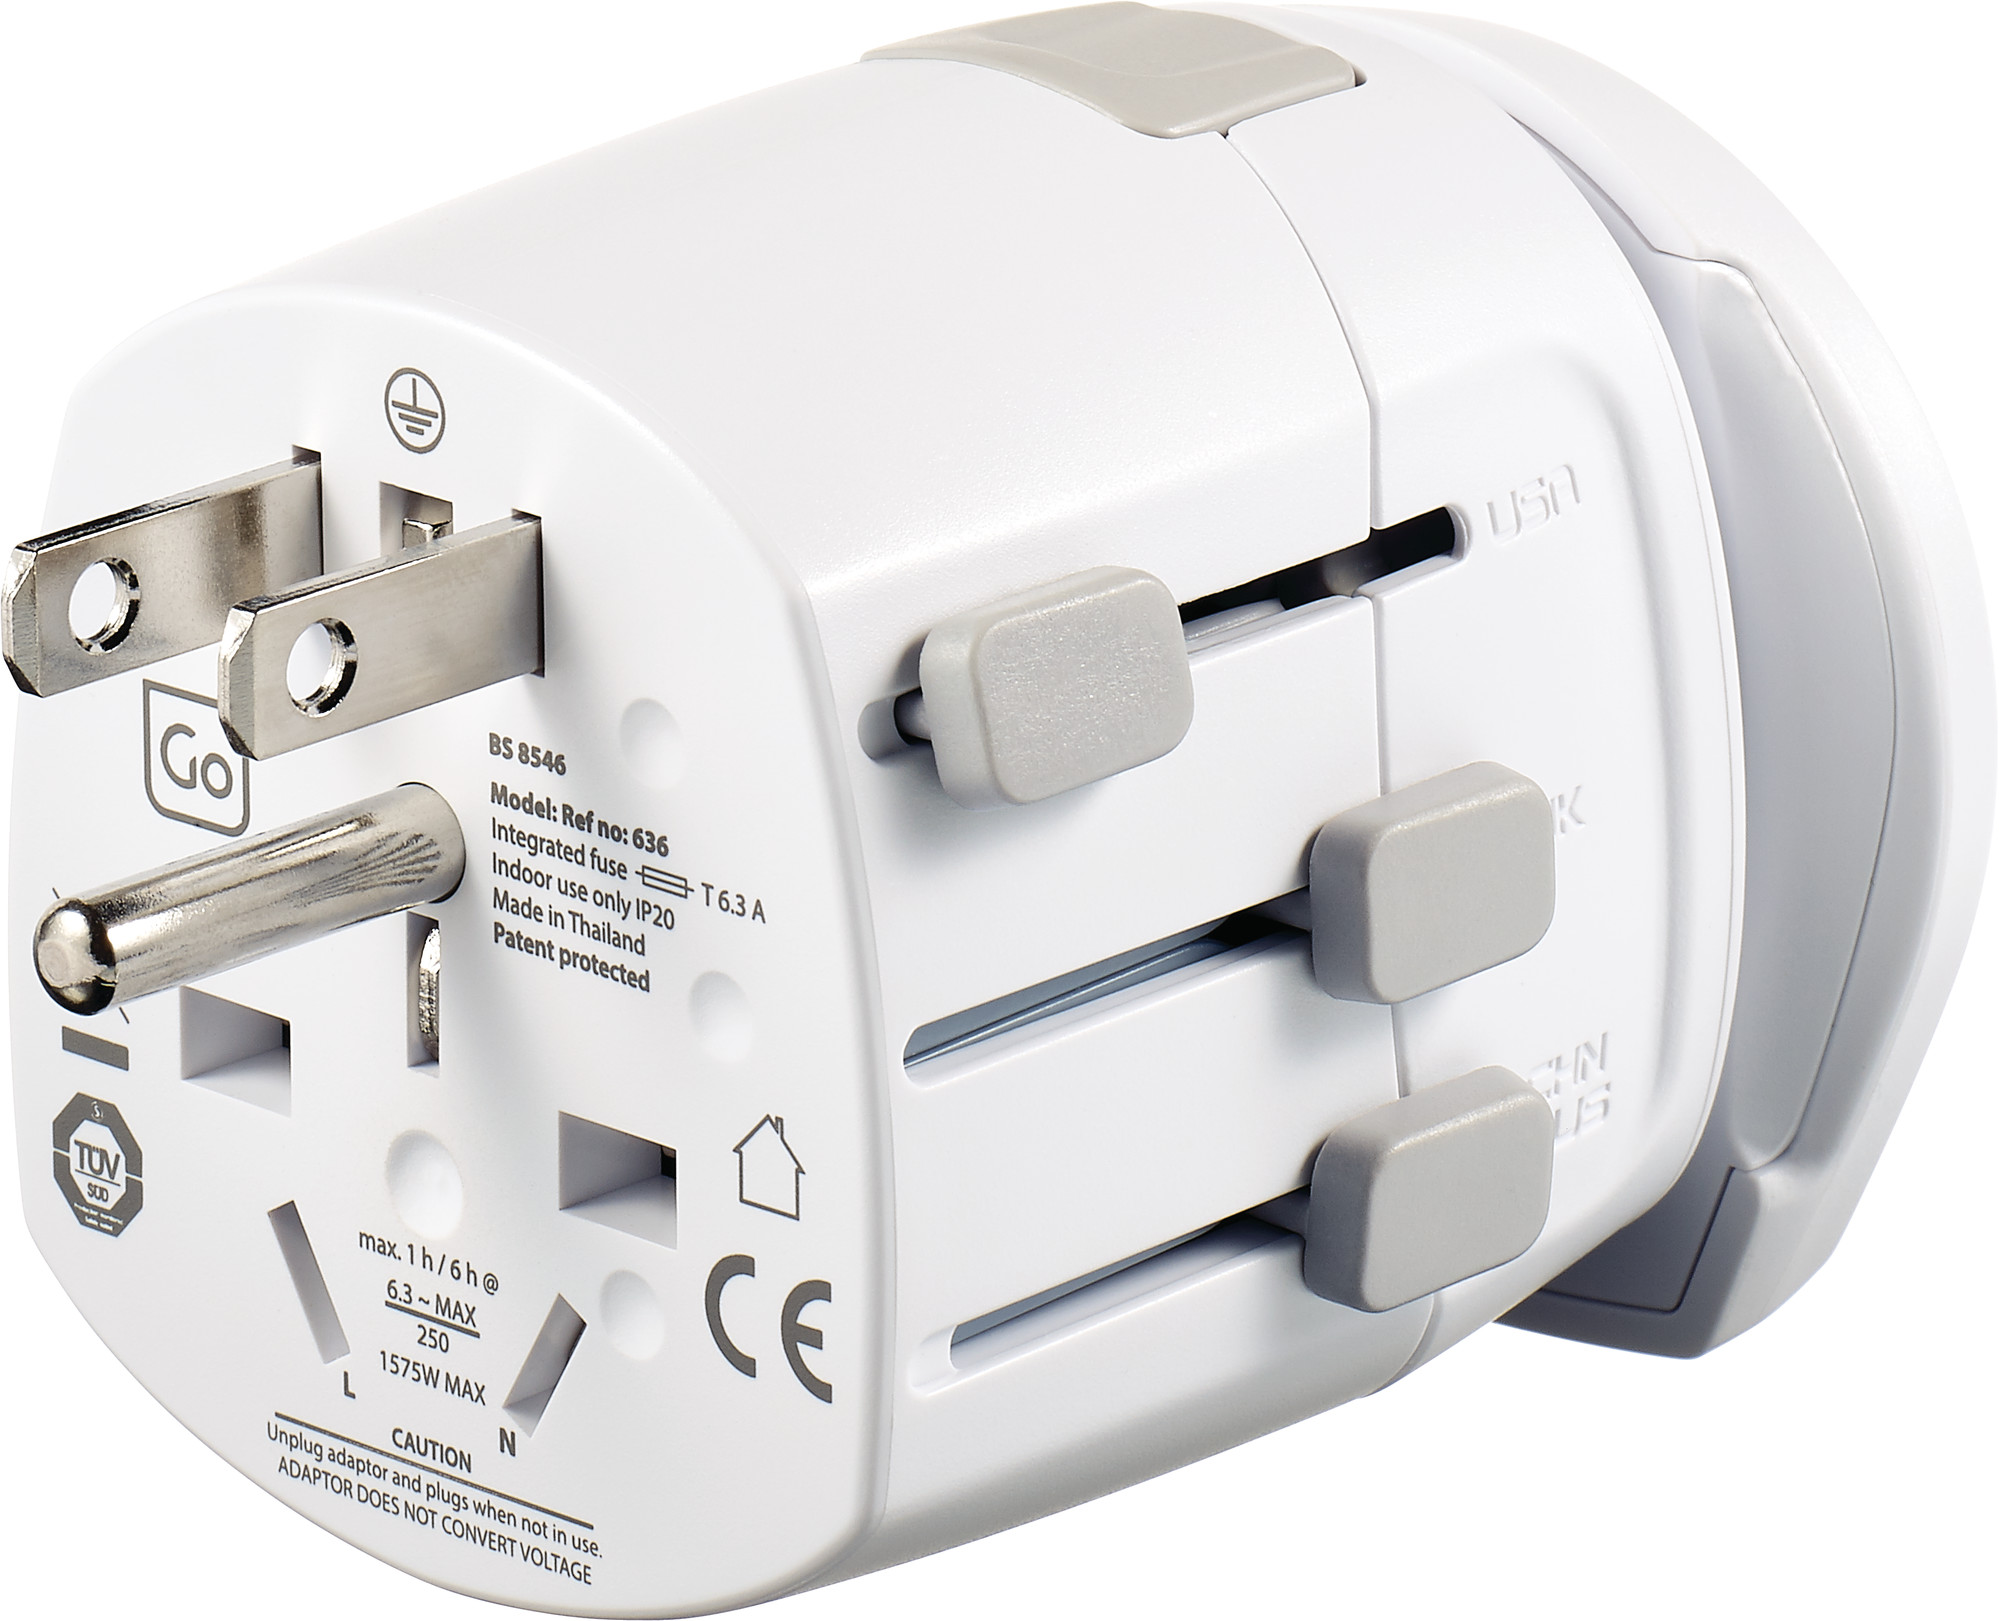 Picture of Go Travel Worldwide Adapter